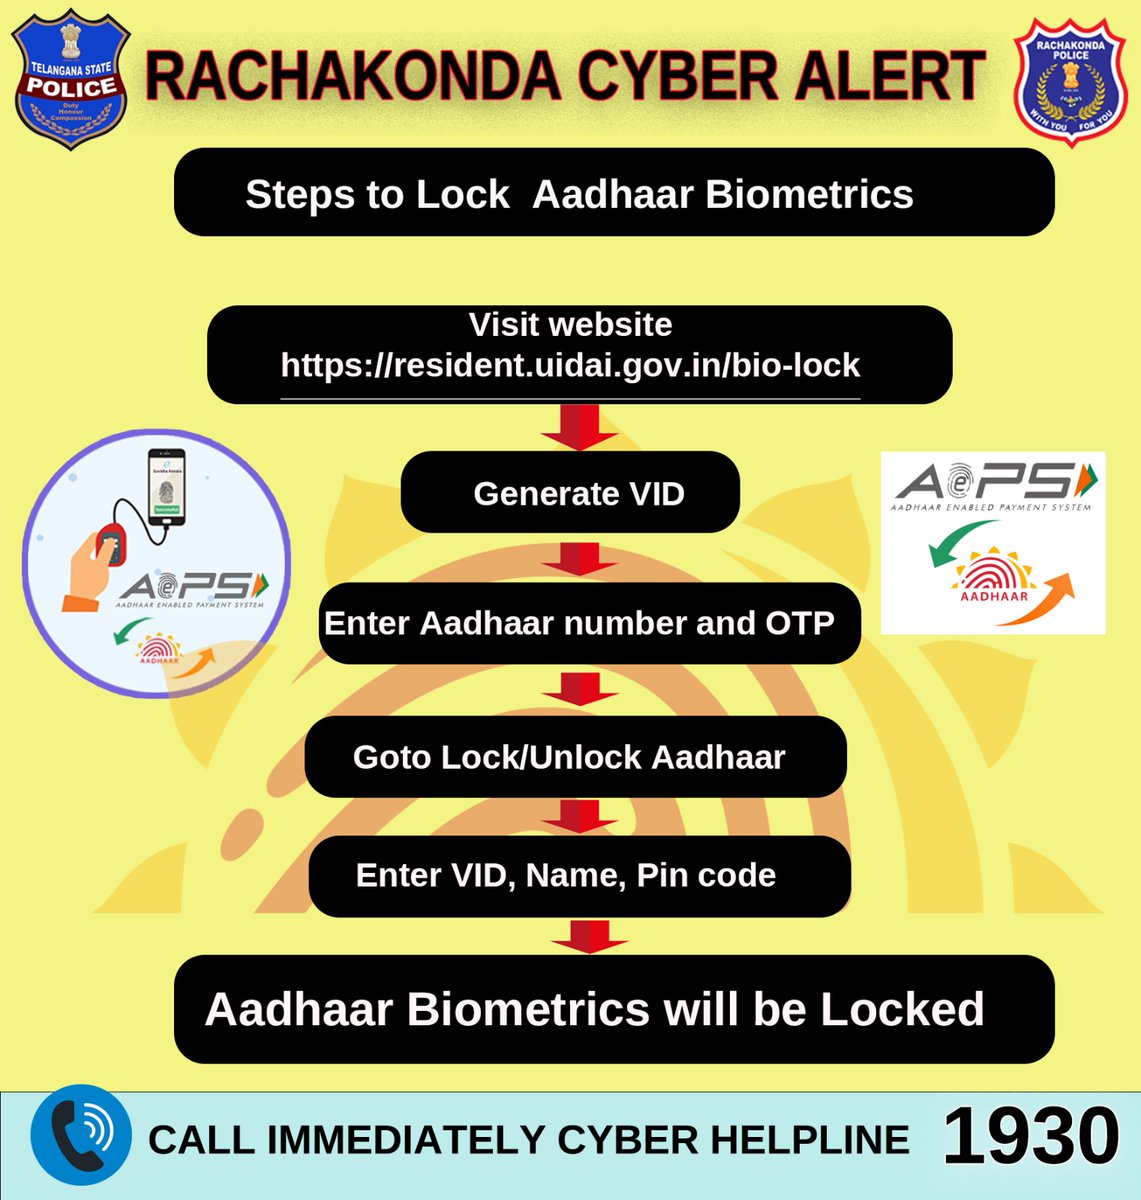 #Rachakonda cyber crimes 📷Be alert! #Report Cyber crime complaints at #Dial 1930 #cybercrime at cybercrime.gov.in @rachakondacop Our Official Pages links : Face book : facebook.com/cybercell.rach…. You tube : youtube.com/@CyberCrimeRac…